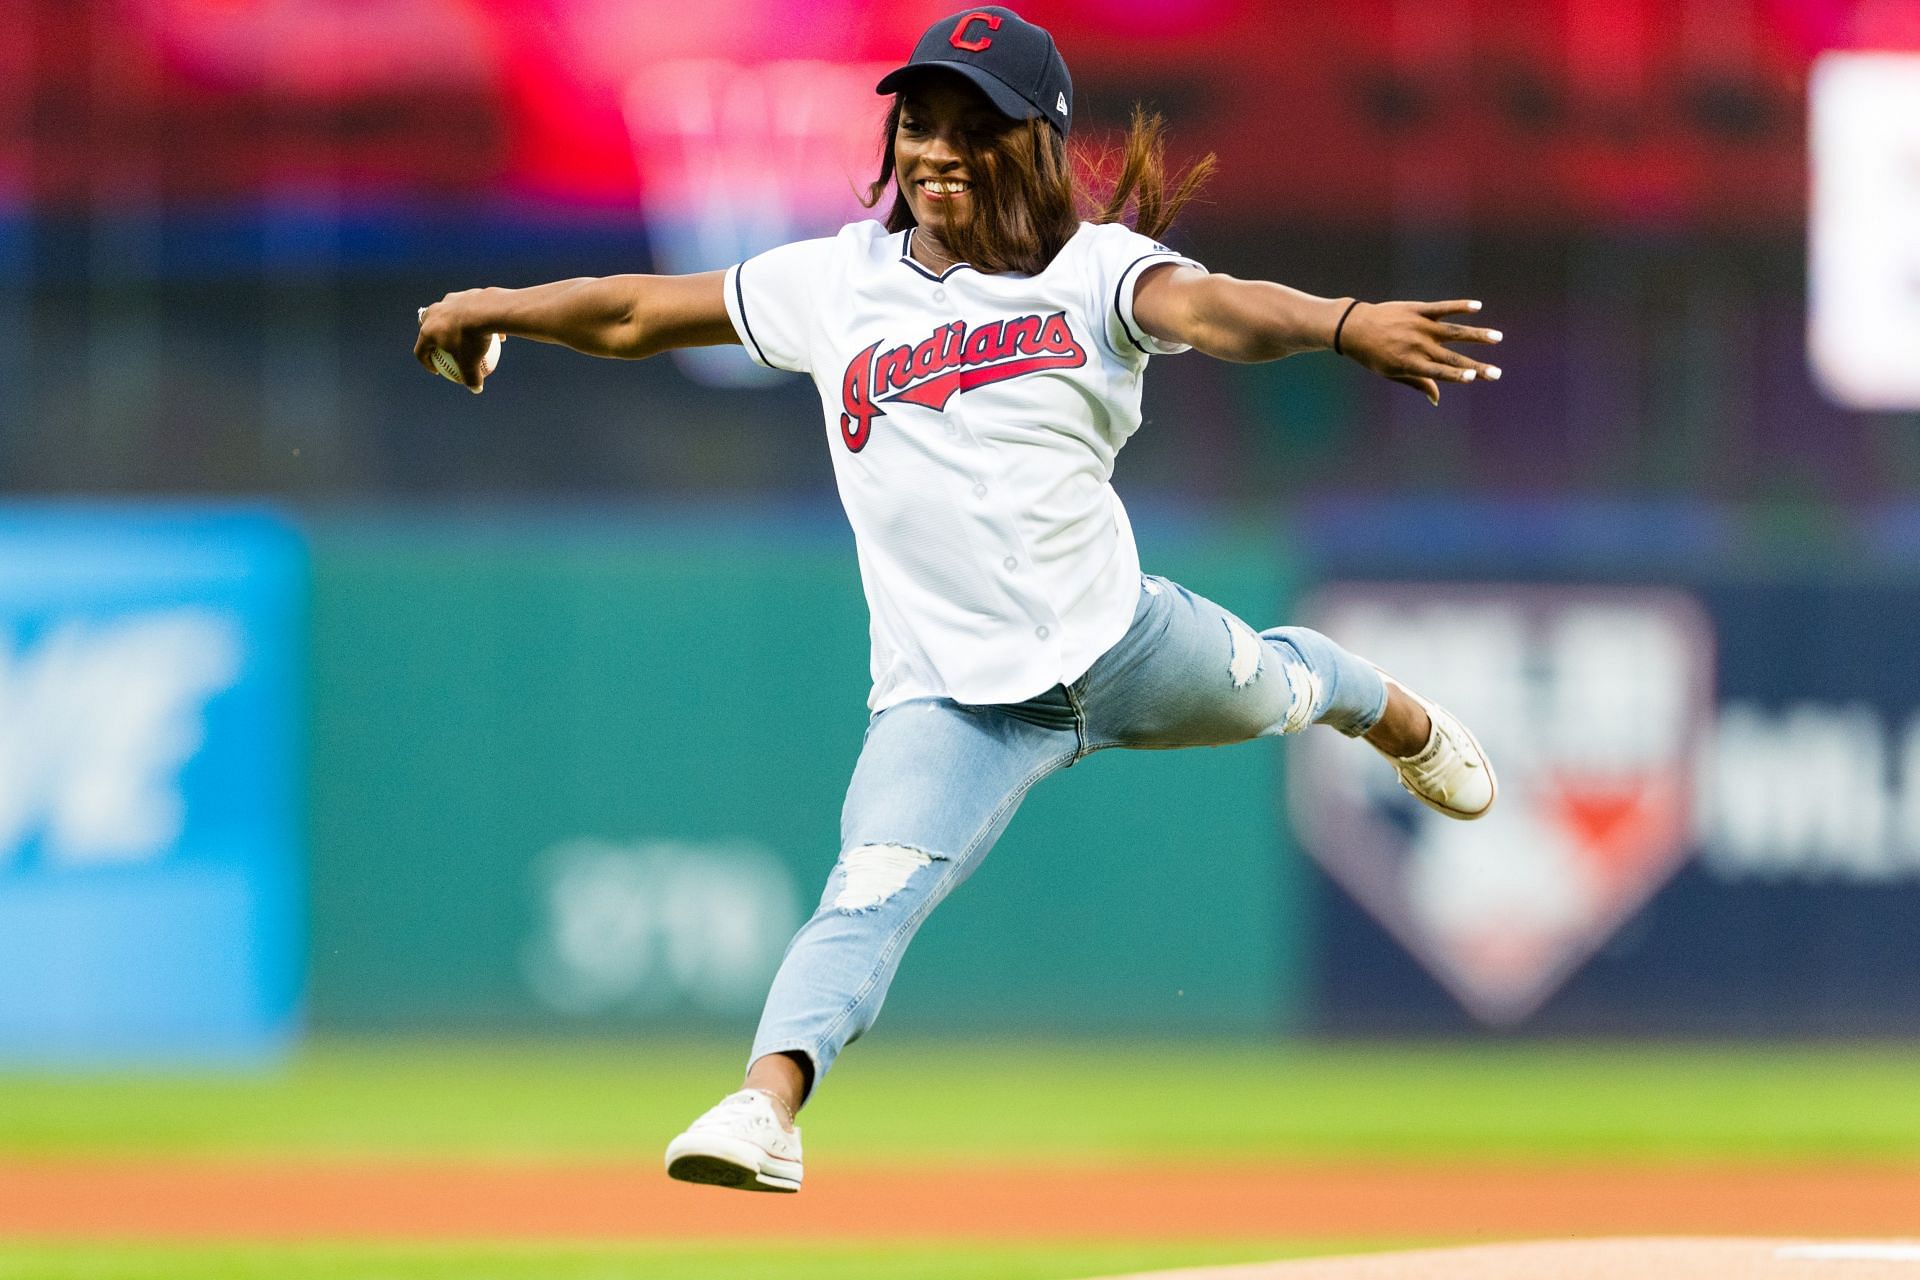 Biles throws the first pitch Baltimore Orioles v Cleveland Indians, 2017 (Photo by Jason Miller/Getty Images)